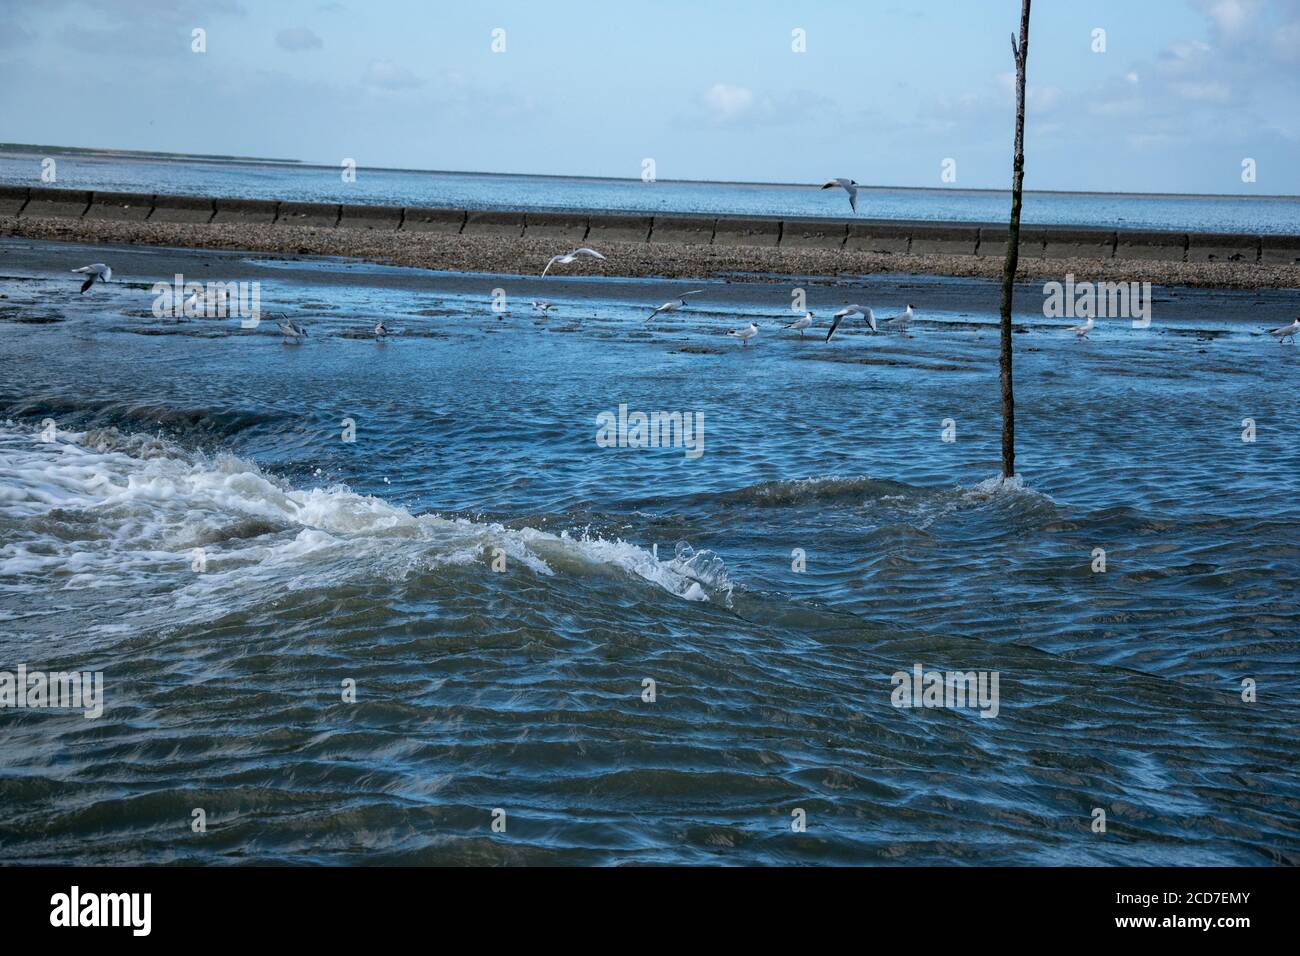 Eye-level shot of seagulls flying over the sea waves Stock Photo